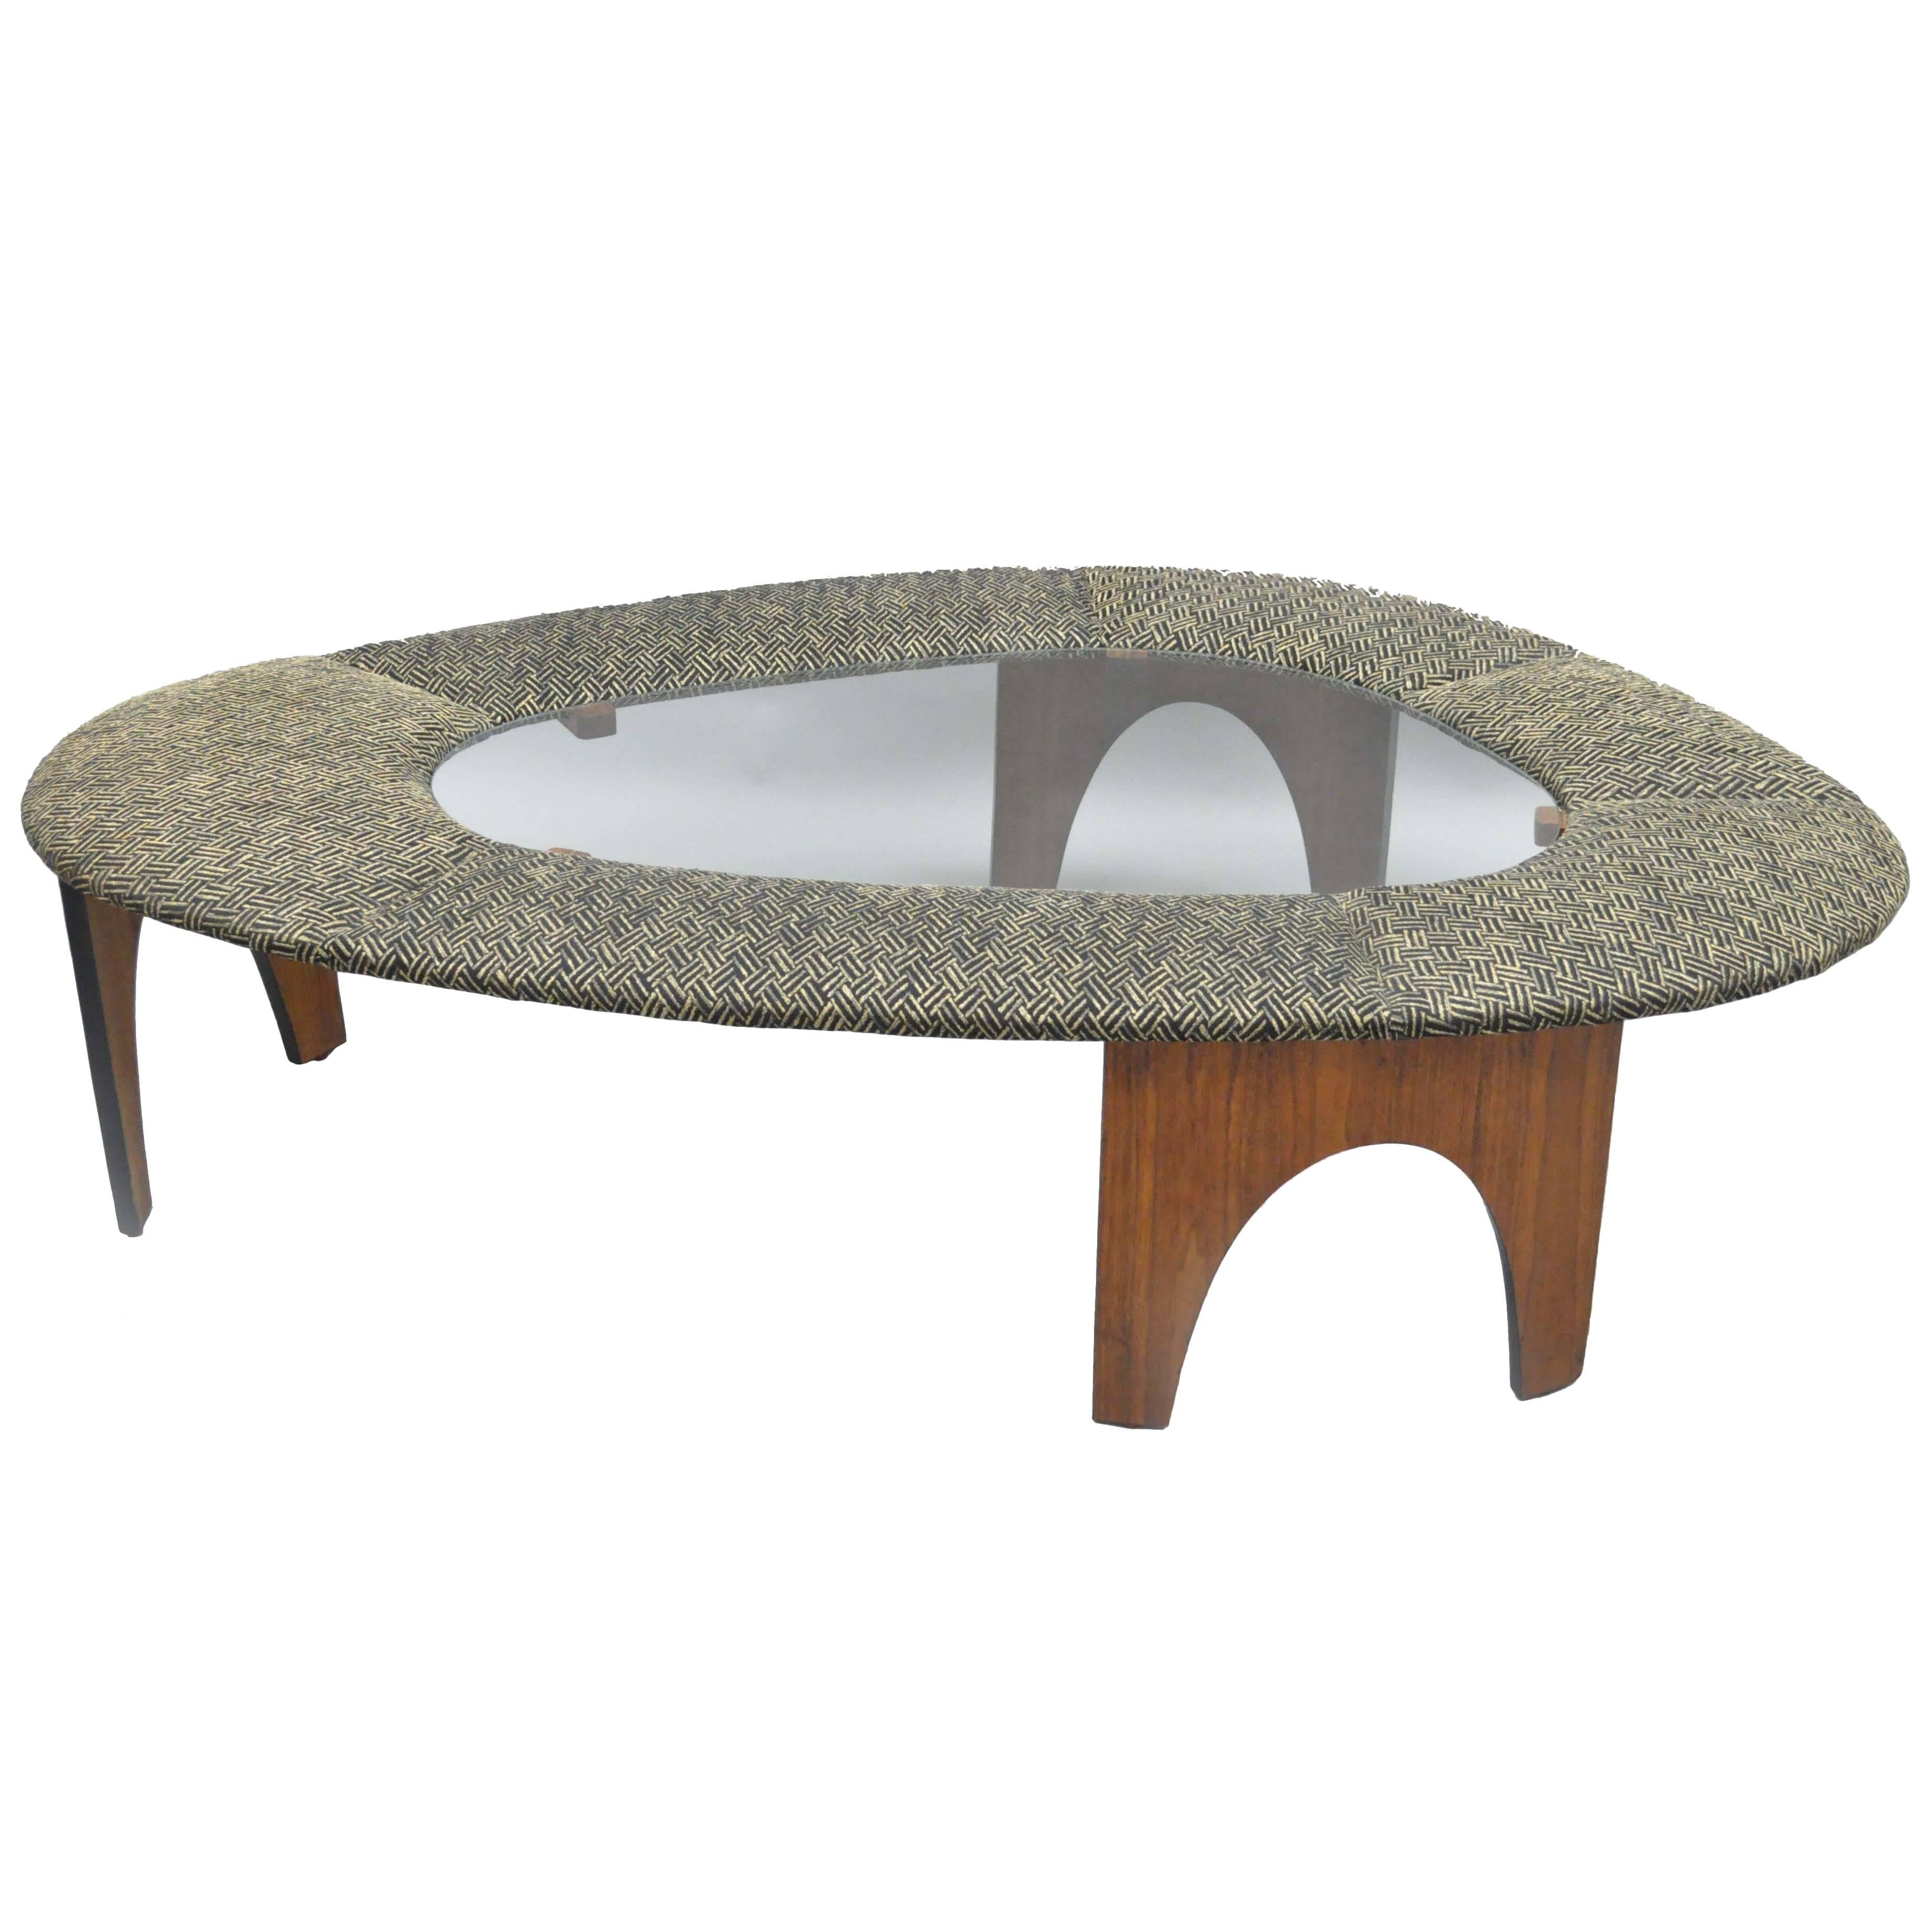 Henry P Glass Intimate Island Suite Walnut Upholstered Mid Century Coffee Table